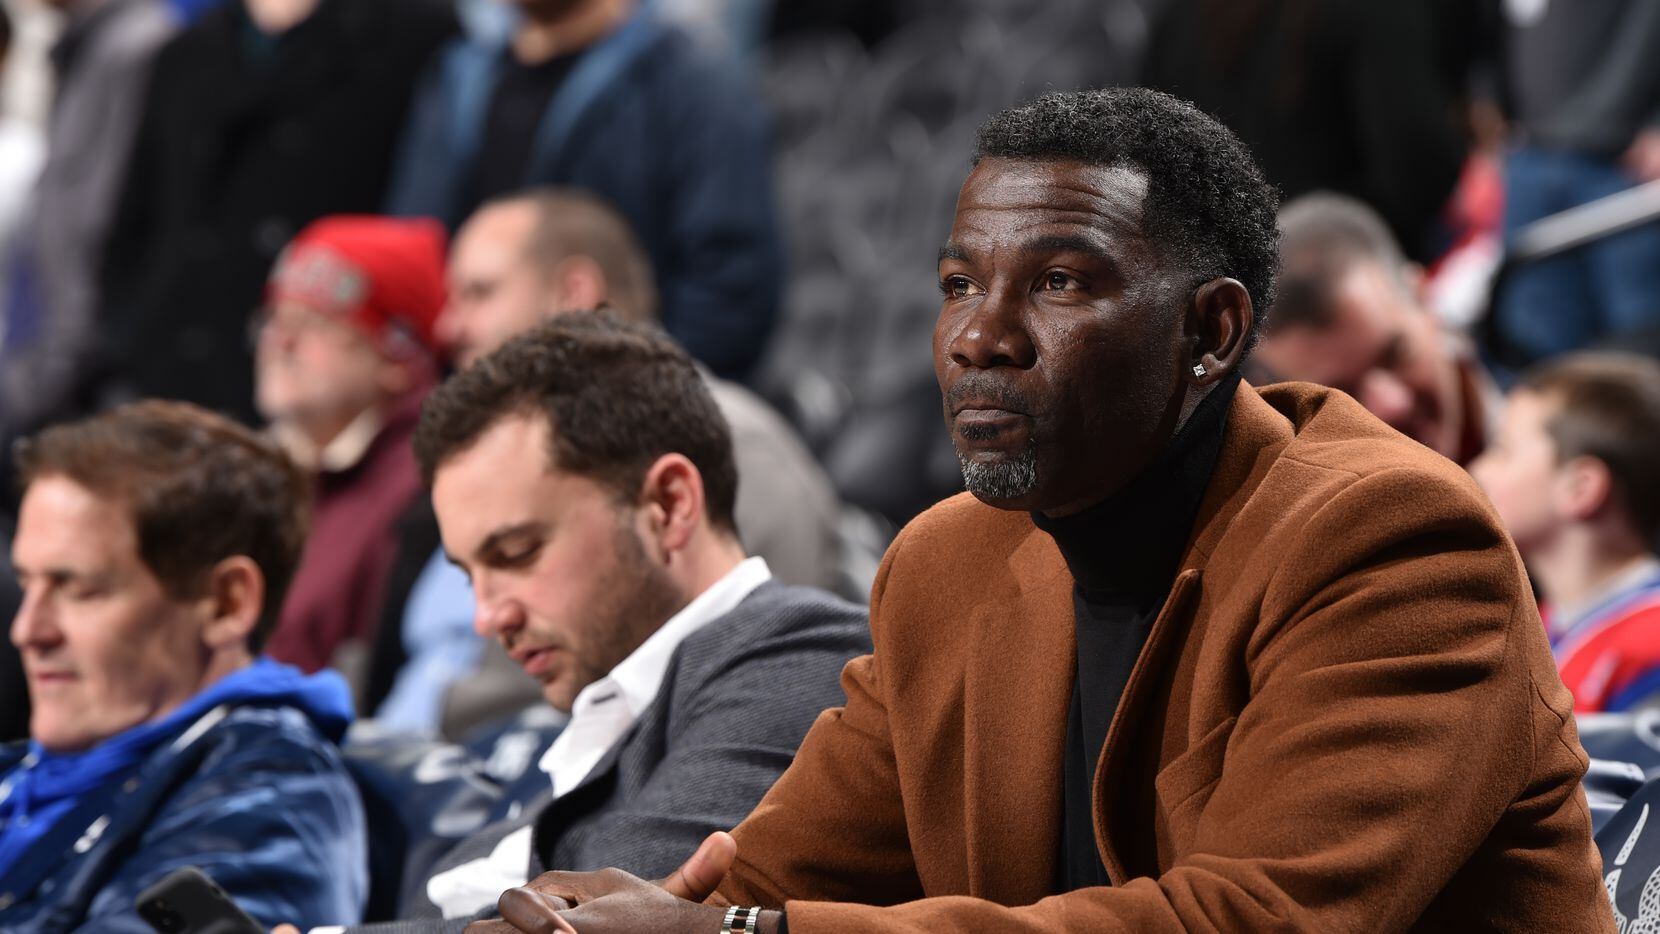 Vice President of Operations, Michael Finley of the Dallas Mavericks attends a game between the Dallas Mavericks and the Philadelphia 76ers on December 20, 2019 at the Wells Fargo Center in Philadelphia, Pennsylvania